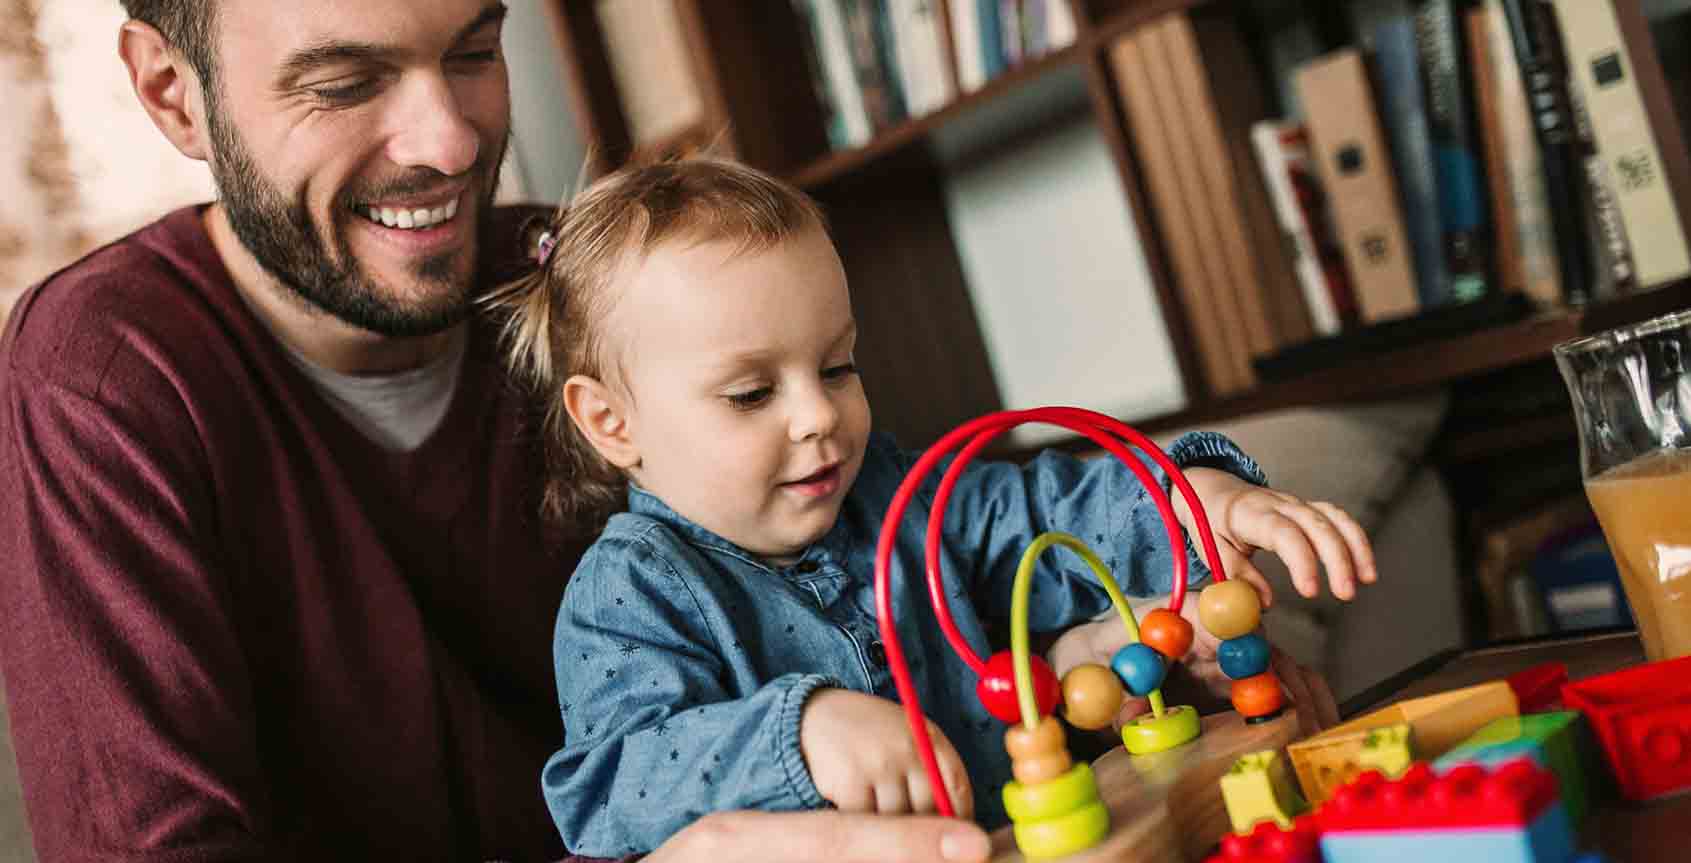 Man smiling at his daughter playing with toys